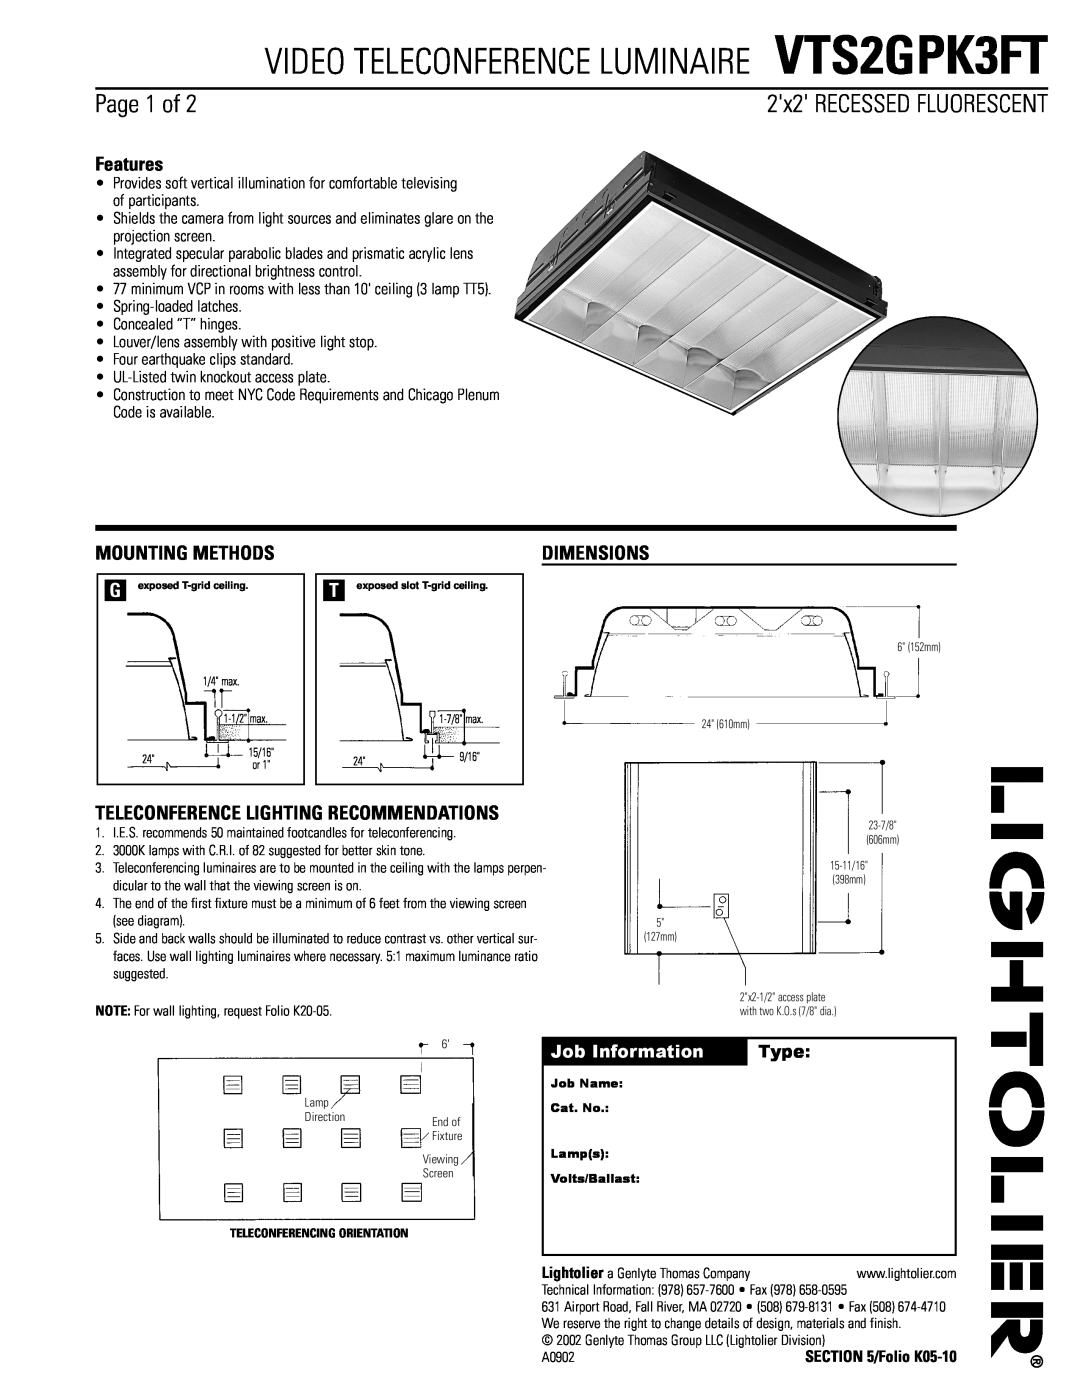 Lightolier dimensions VIDEO TELECONFERENCE LUMINAIRE VTS2GPK3FT, Page 1 of, Features, Mounting Methods, Dimensions 